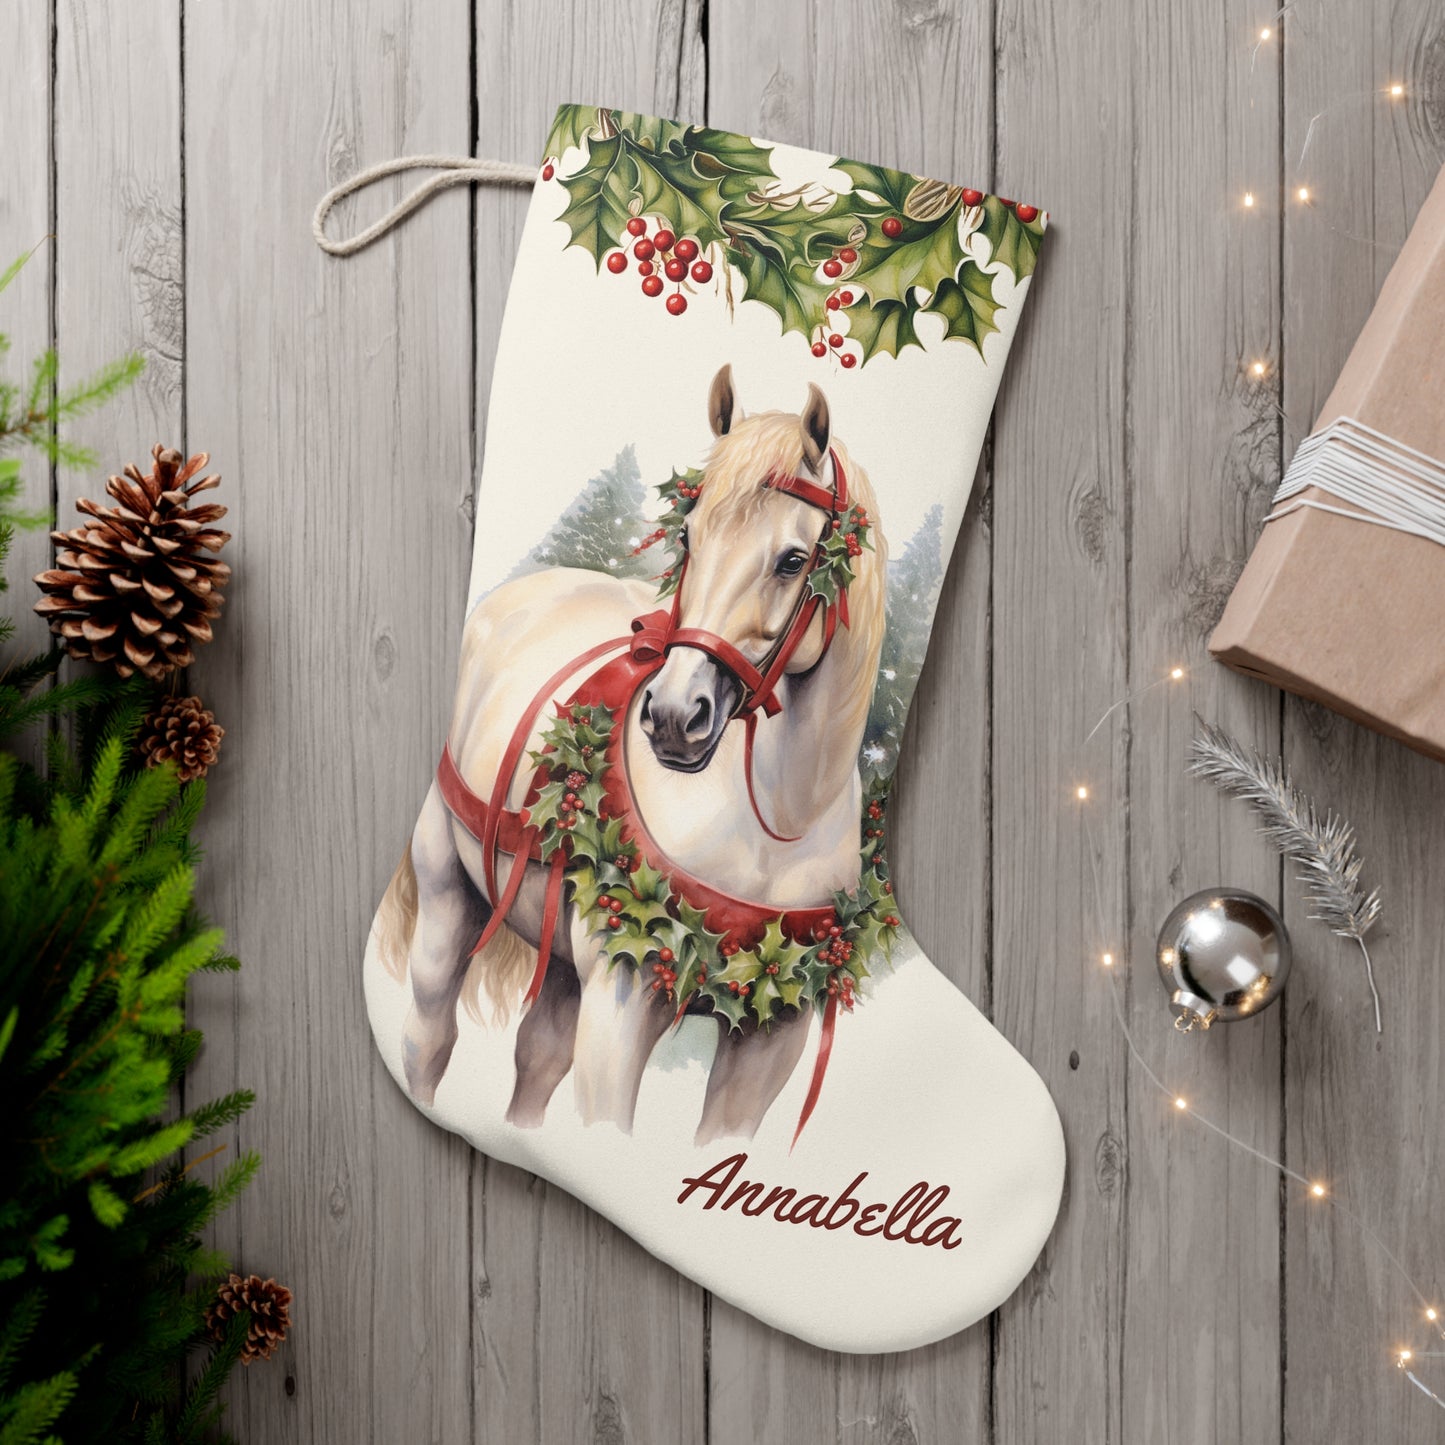 Vintage Felt Christmas Stocking with Horse Handmade and Personalized